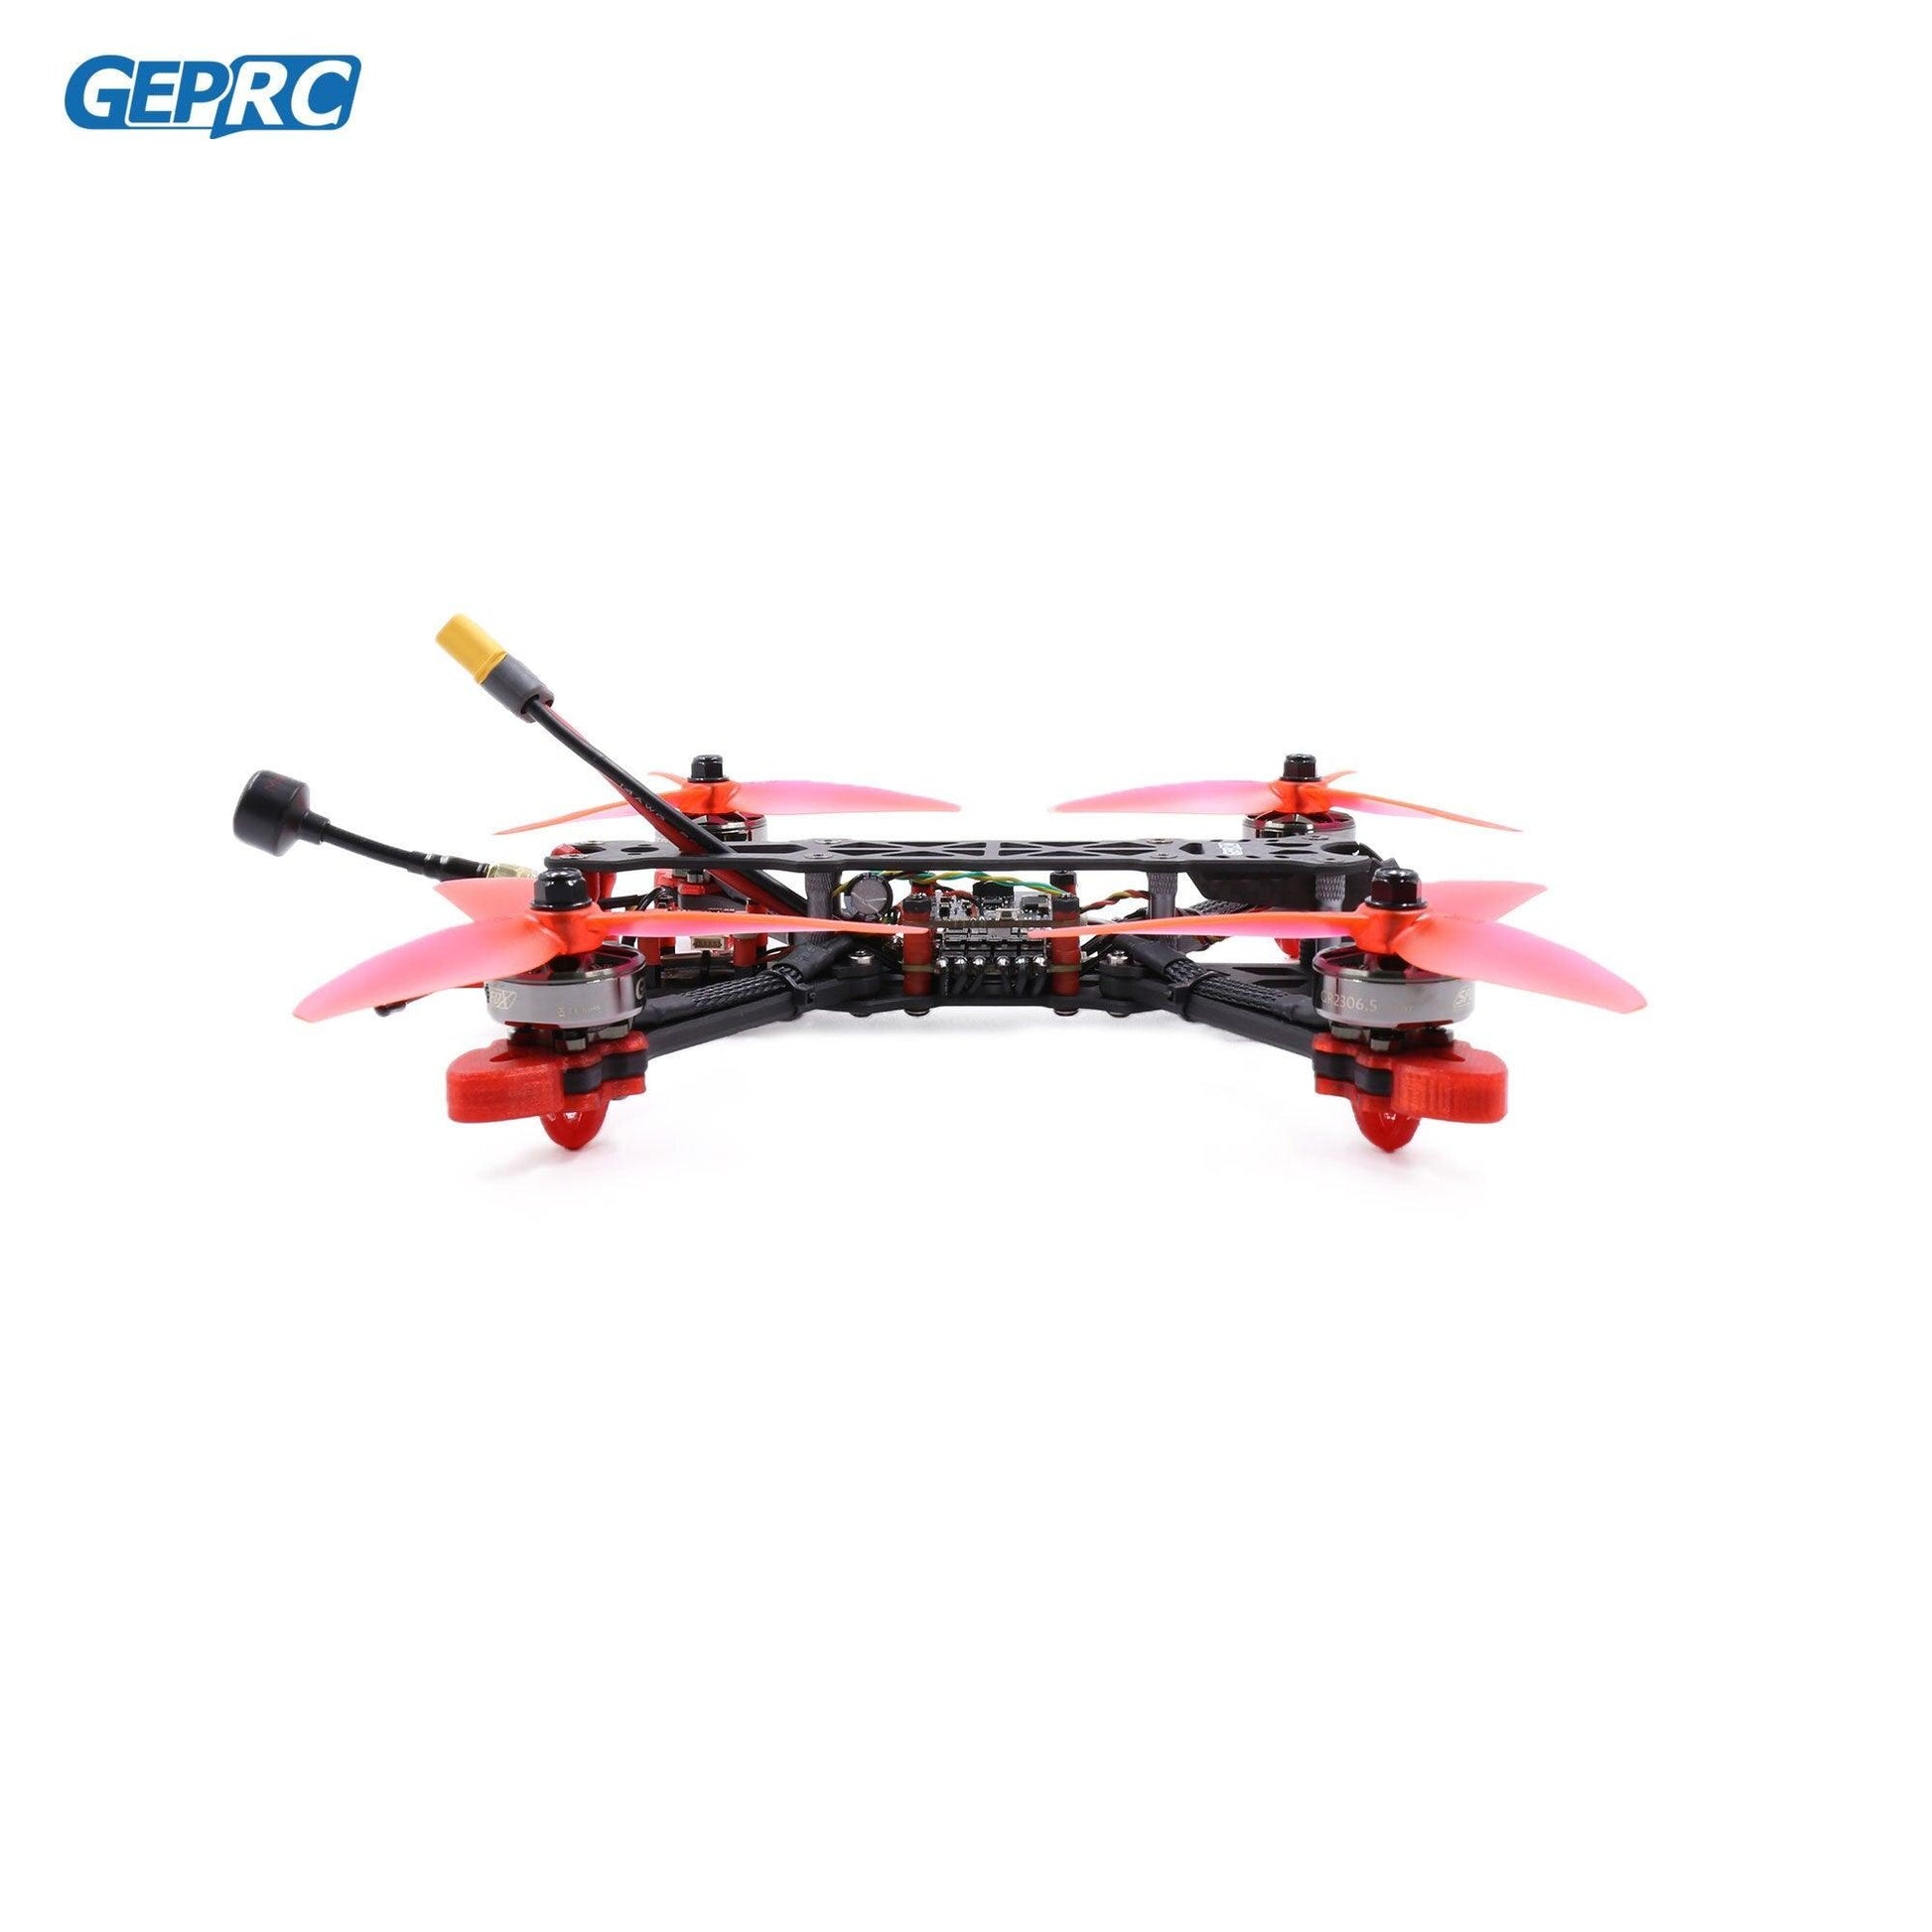 GEPRC MARK4 FPV Drone - Freestyle FPV 4S/6S Caddx Ratel 2306.5 1850/2450KV SPAN F722 HD For RC FPV Quadcopter Freestyle Drone - RCDrone